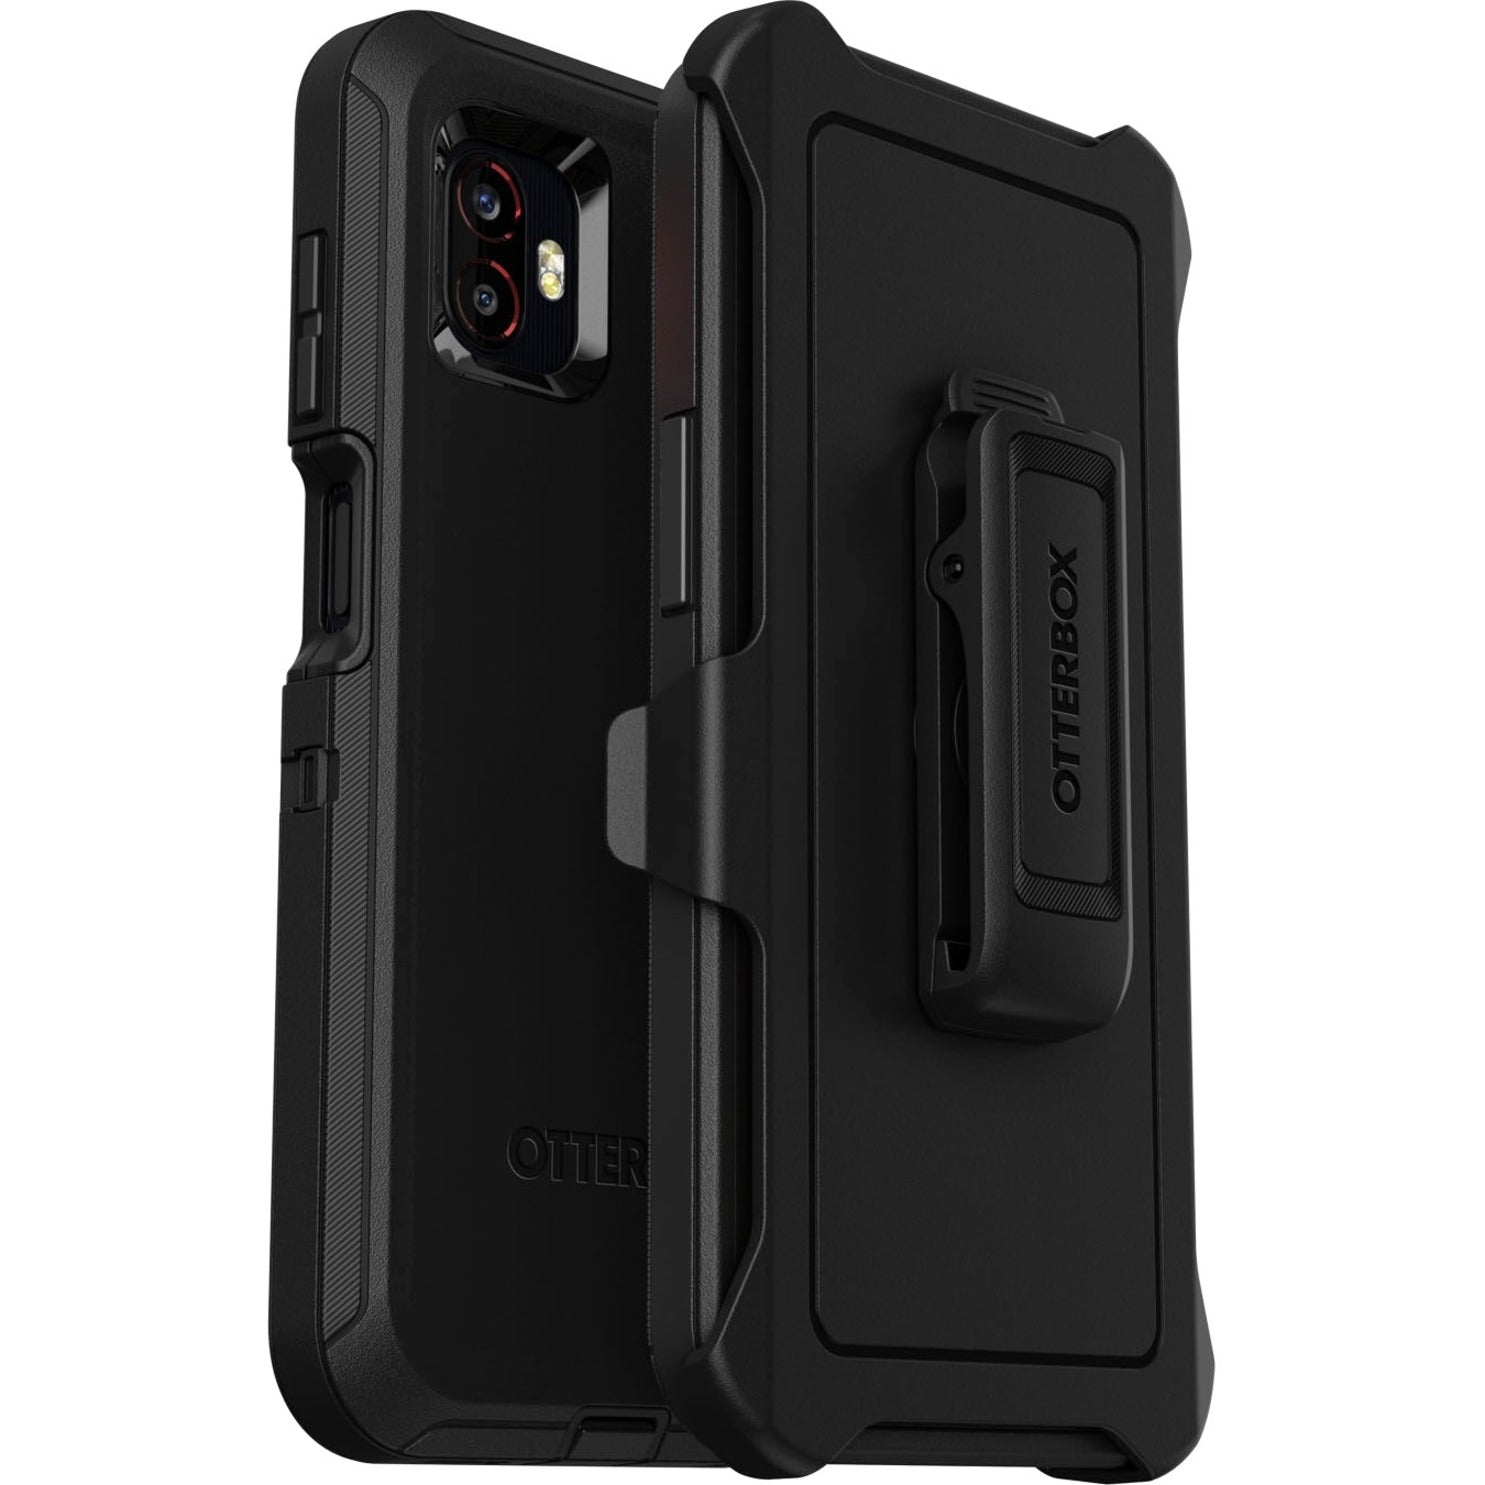 OtterBox 77-92304 Defender Smartphone Case, Black - Ultimate Protection for Samsung Galaxy XCover6 Pro